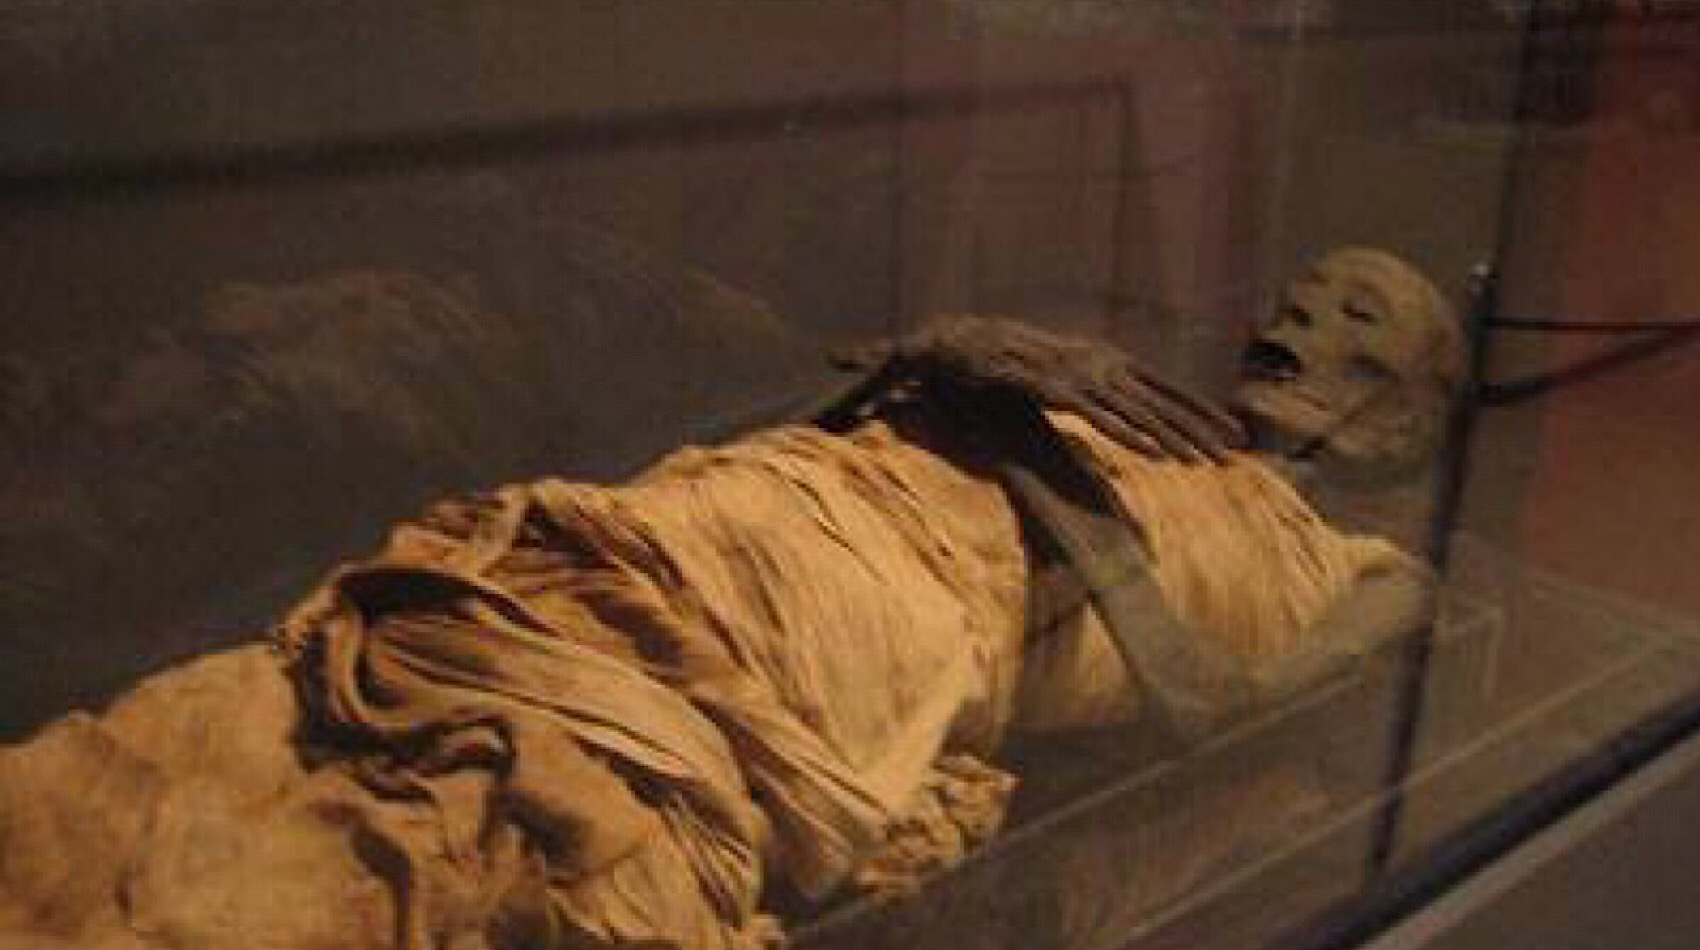 Mummy in Egyptian Museum